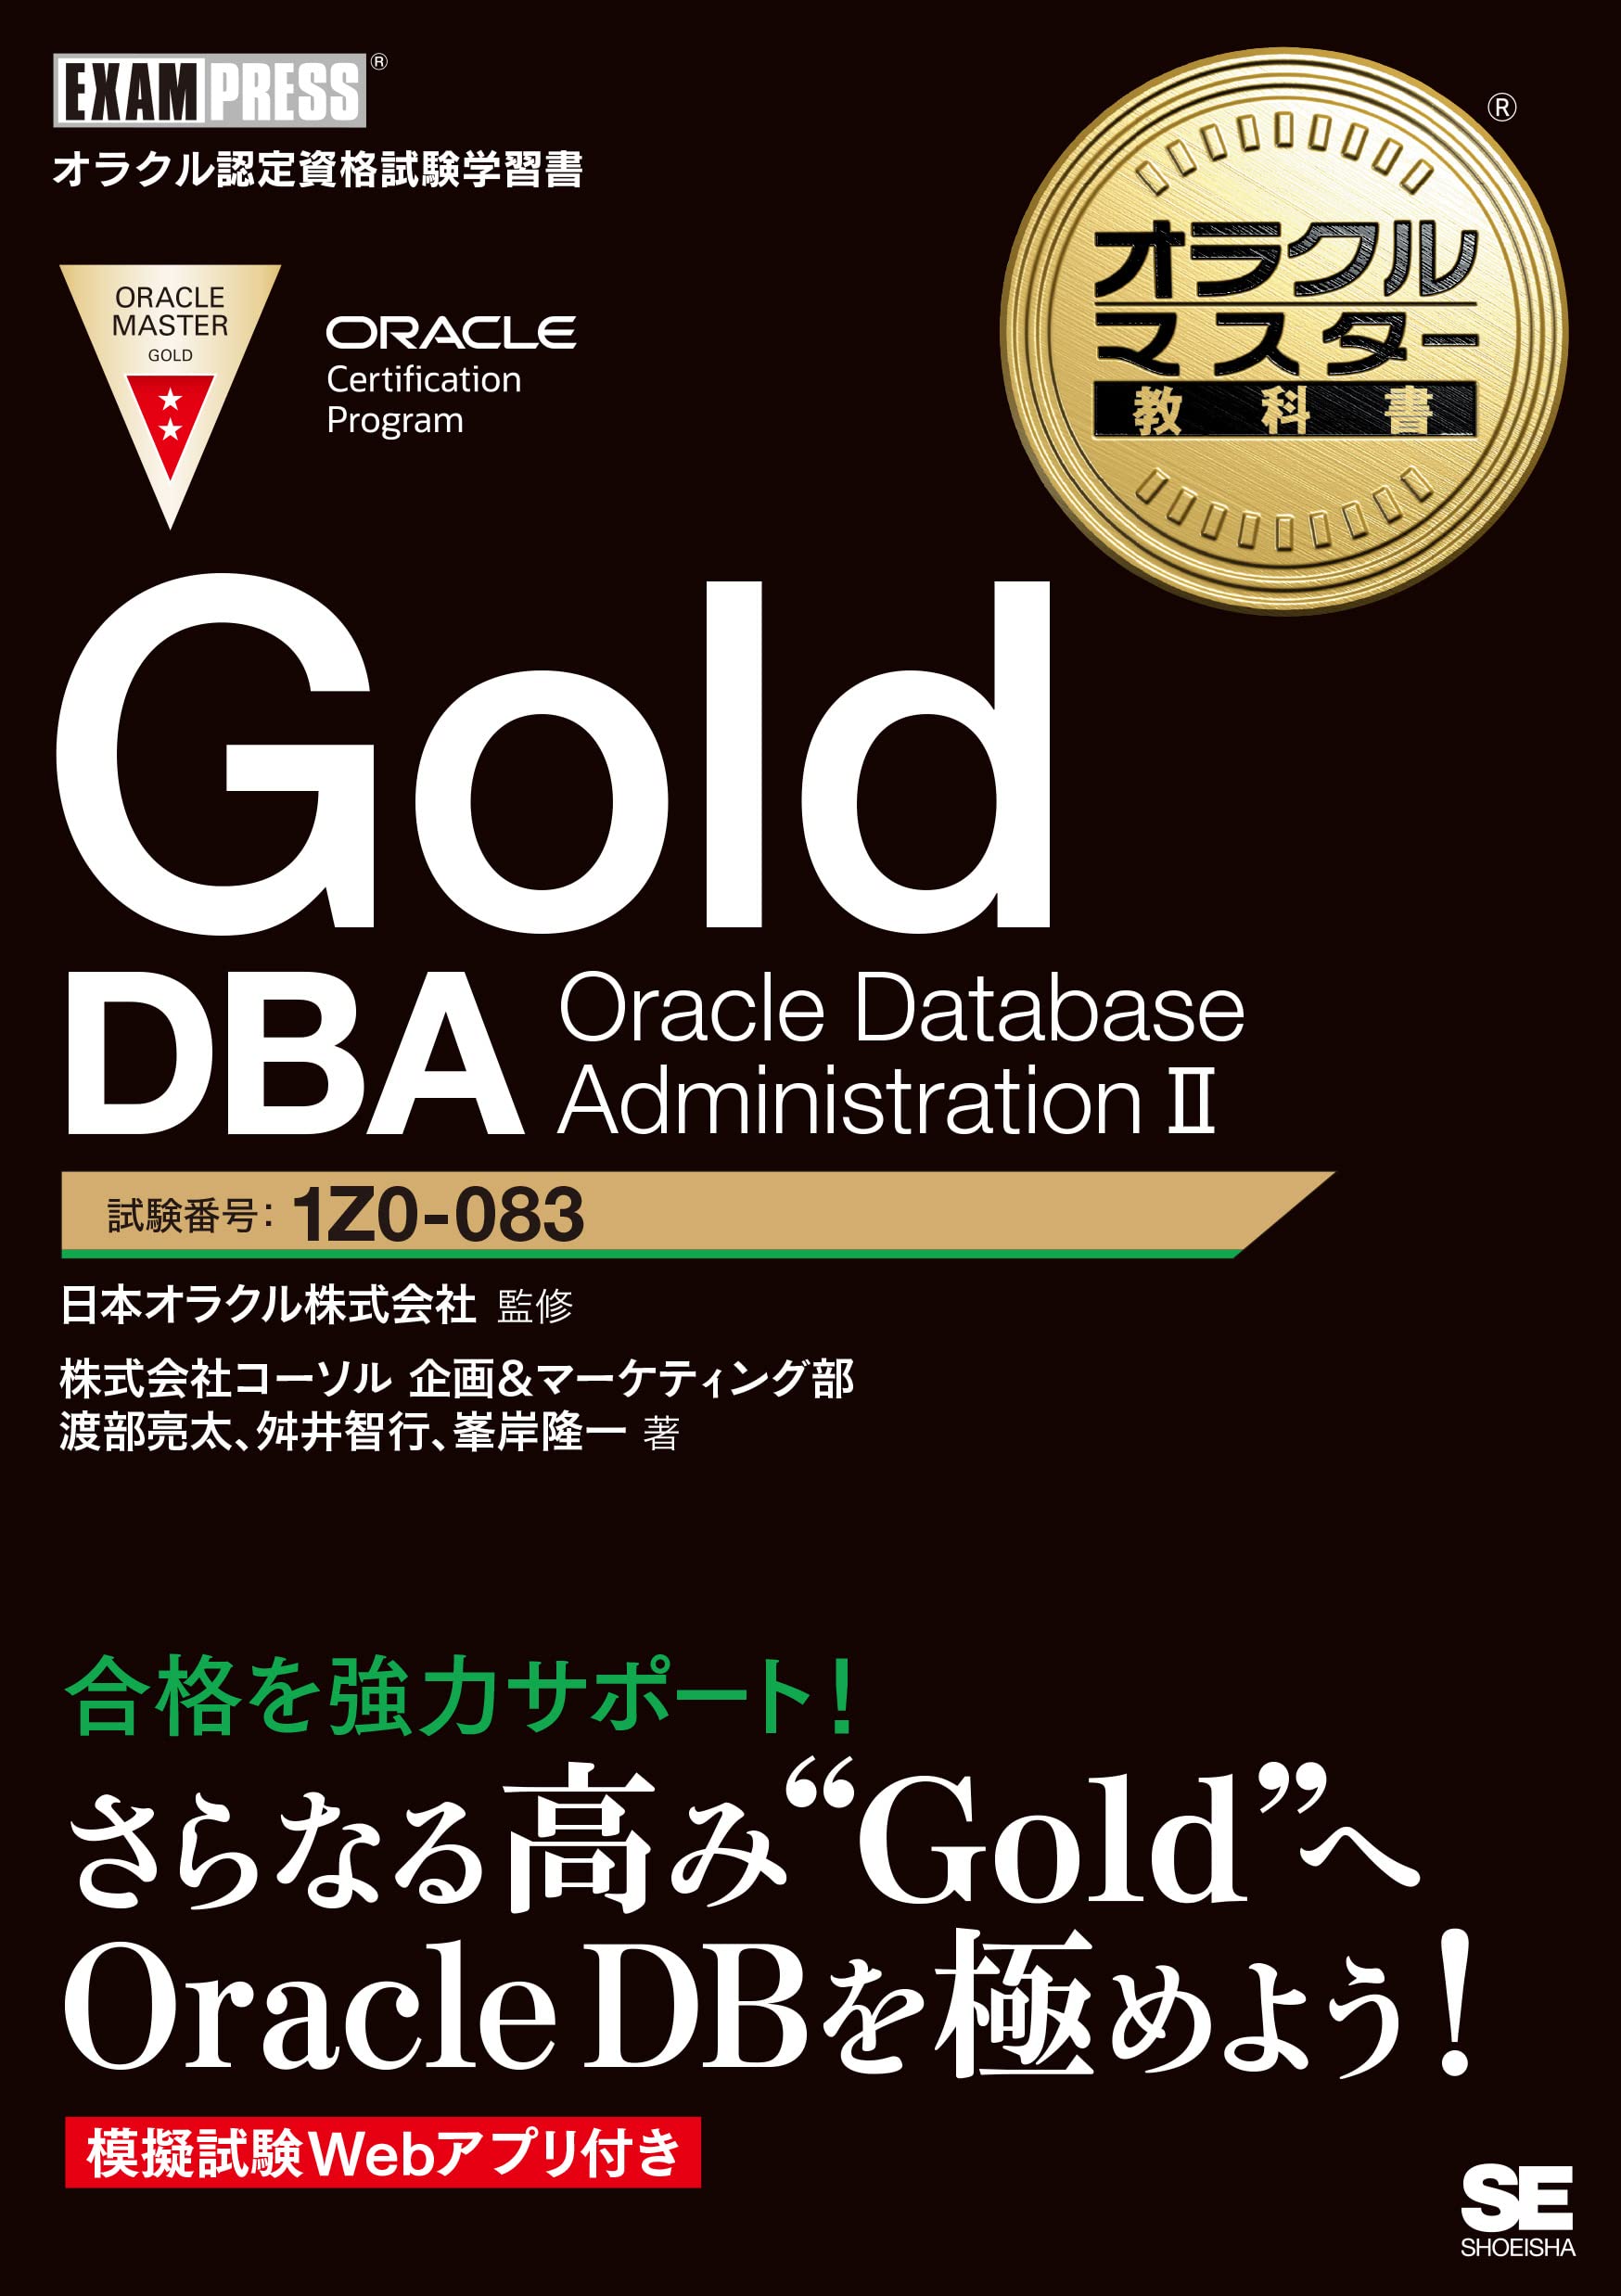 ORACLE MASTER Gold DBA 2019試験対策本の発売日が決定しました